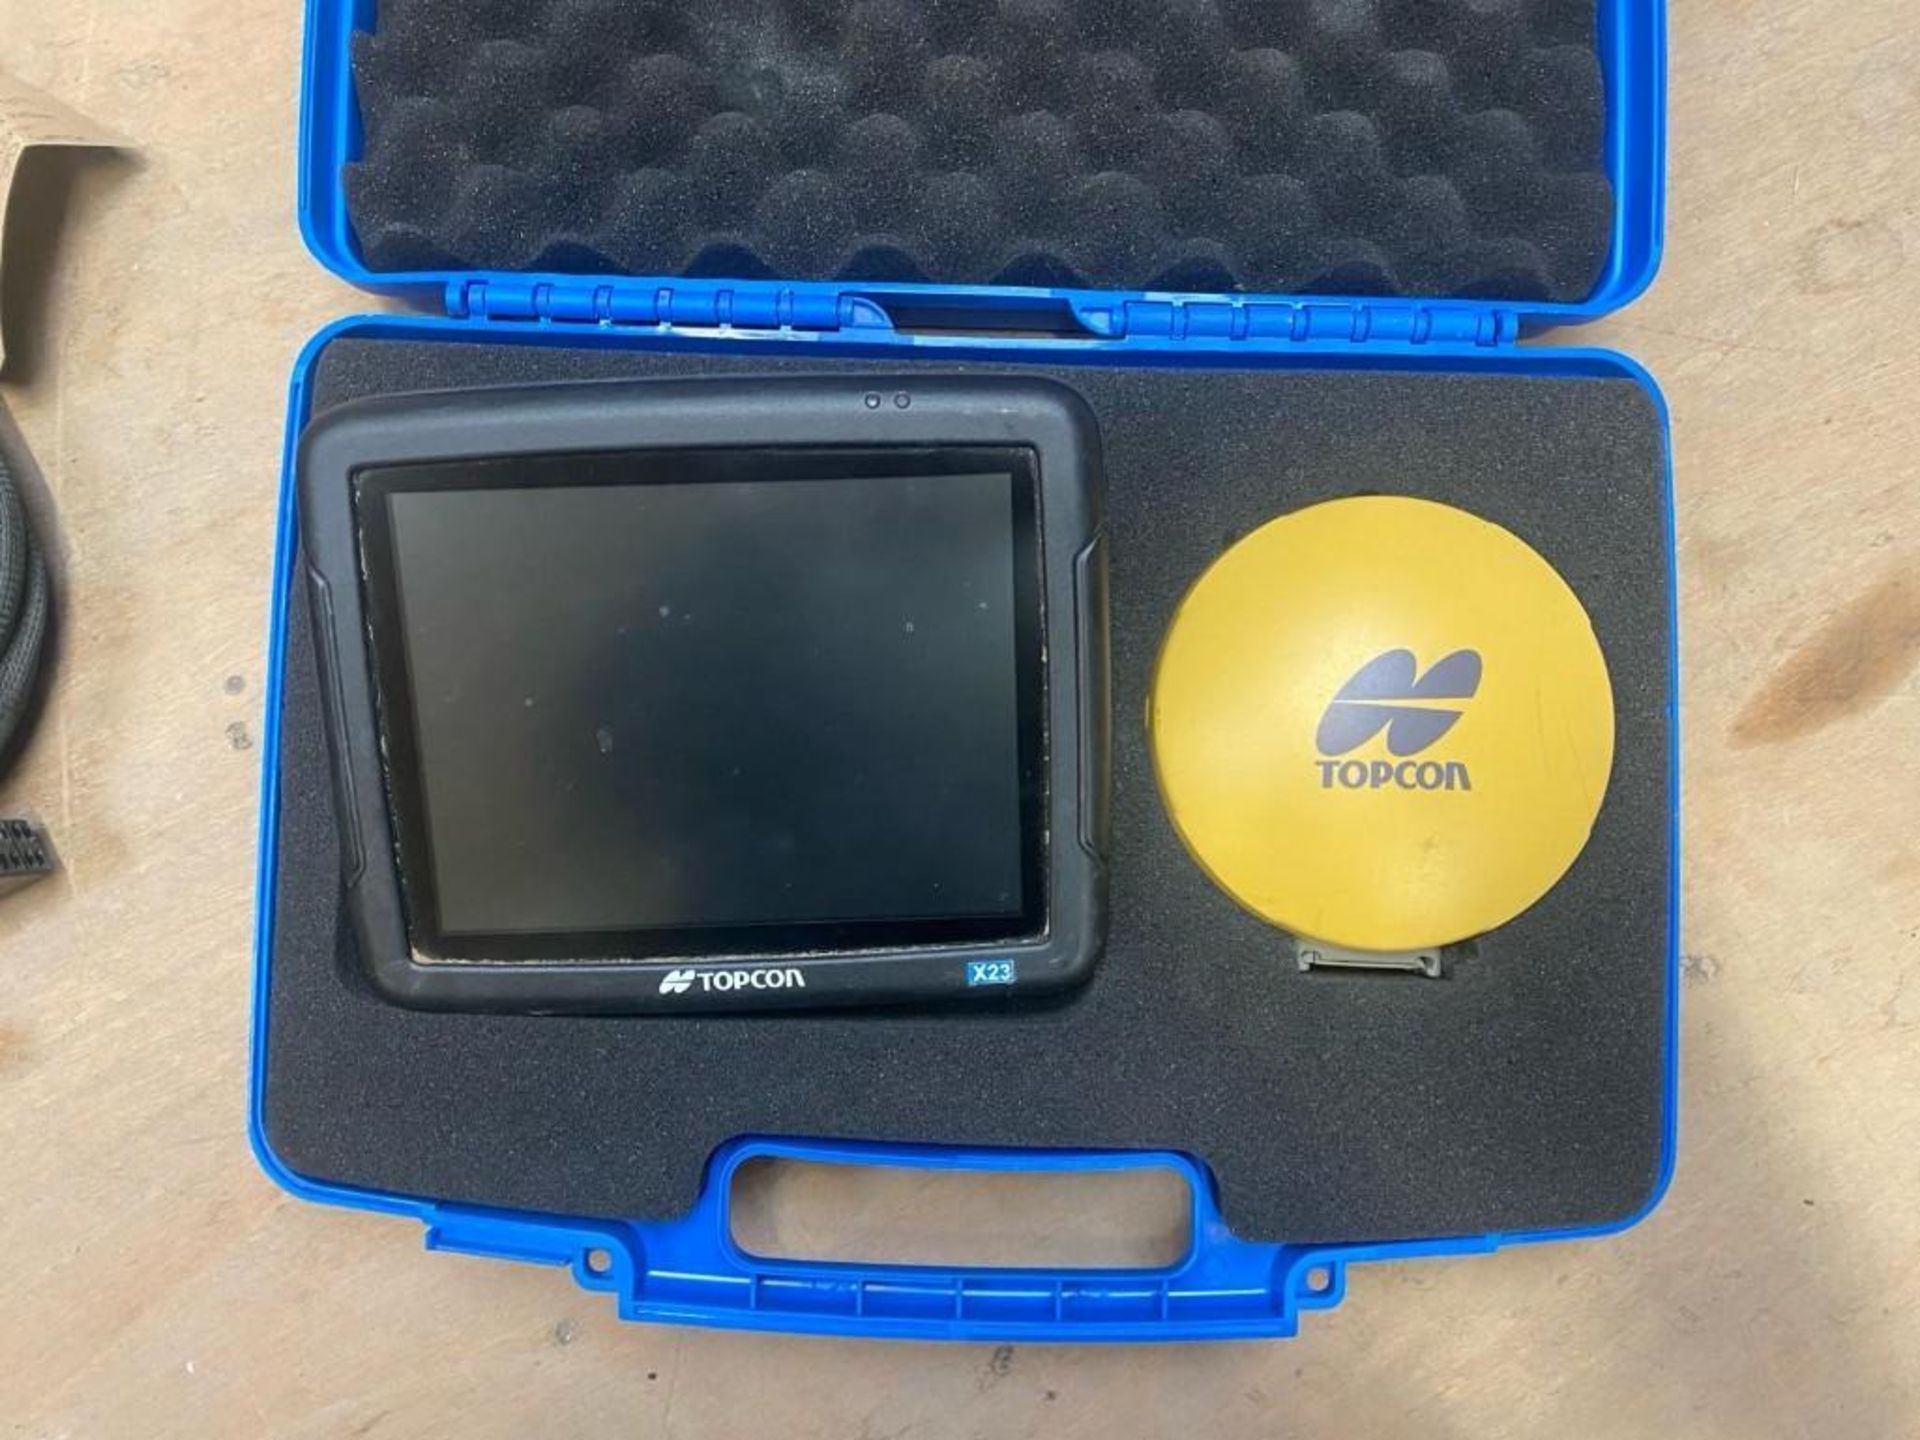 Topcon X23 receiver and screen with SGR-1 receiver light bar system